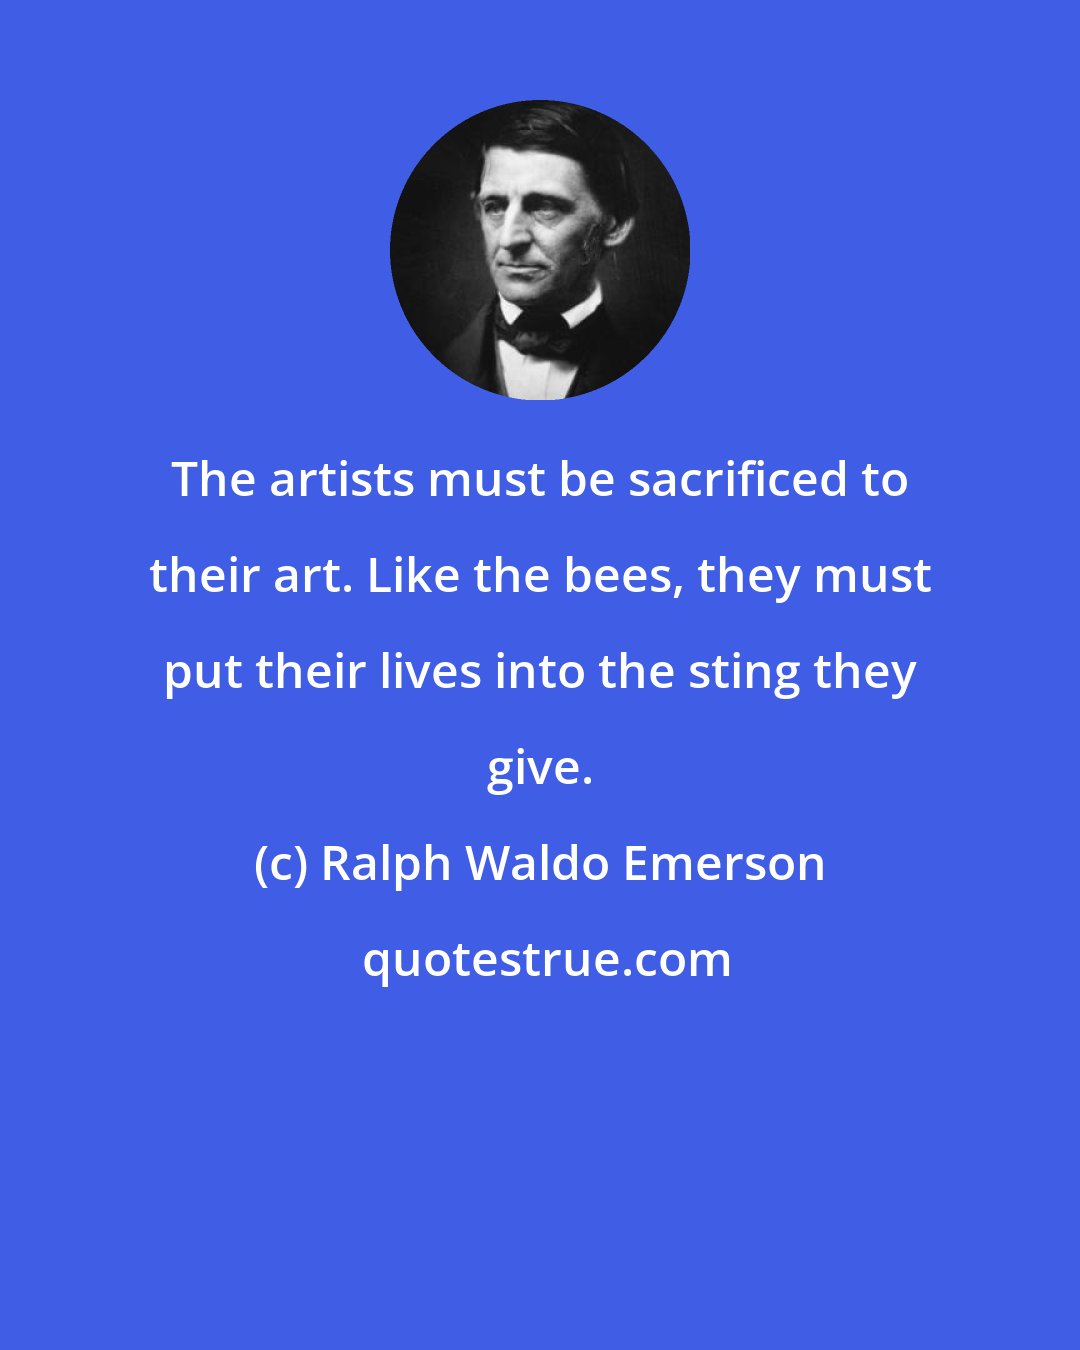 Ralph Waldo Emerson: The artists must be sacrificed to their art. Like the bees, they must put their lives into the sting they give.